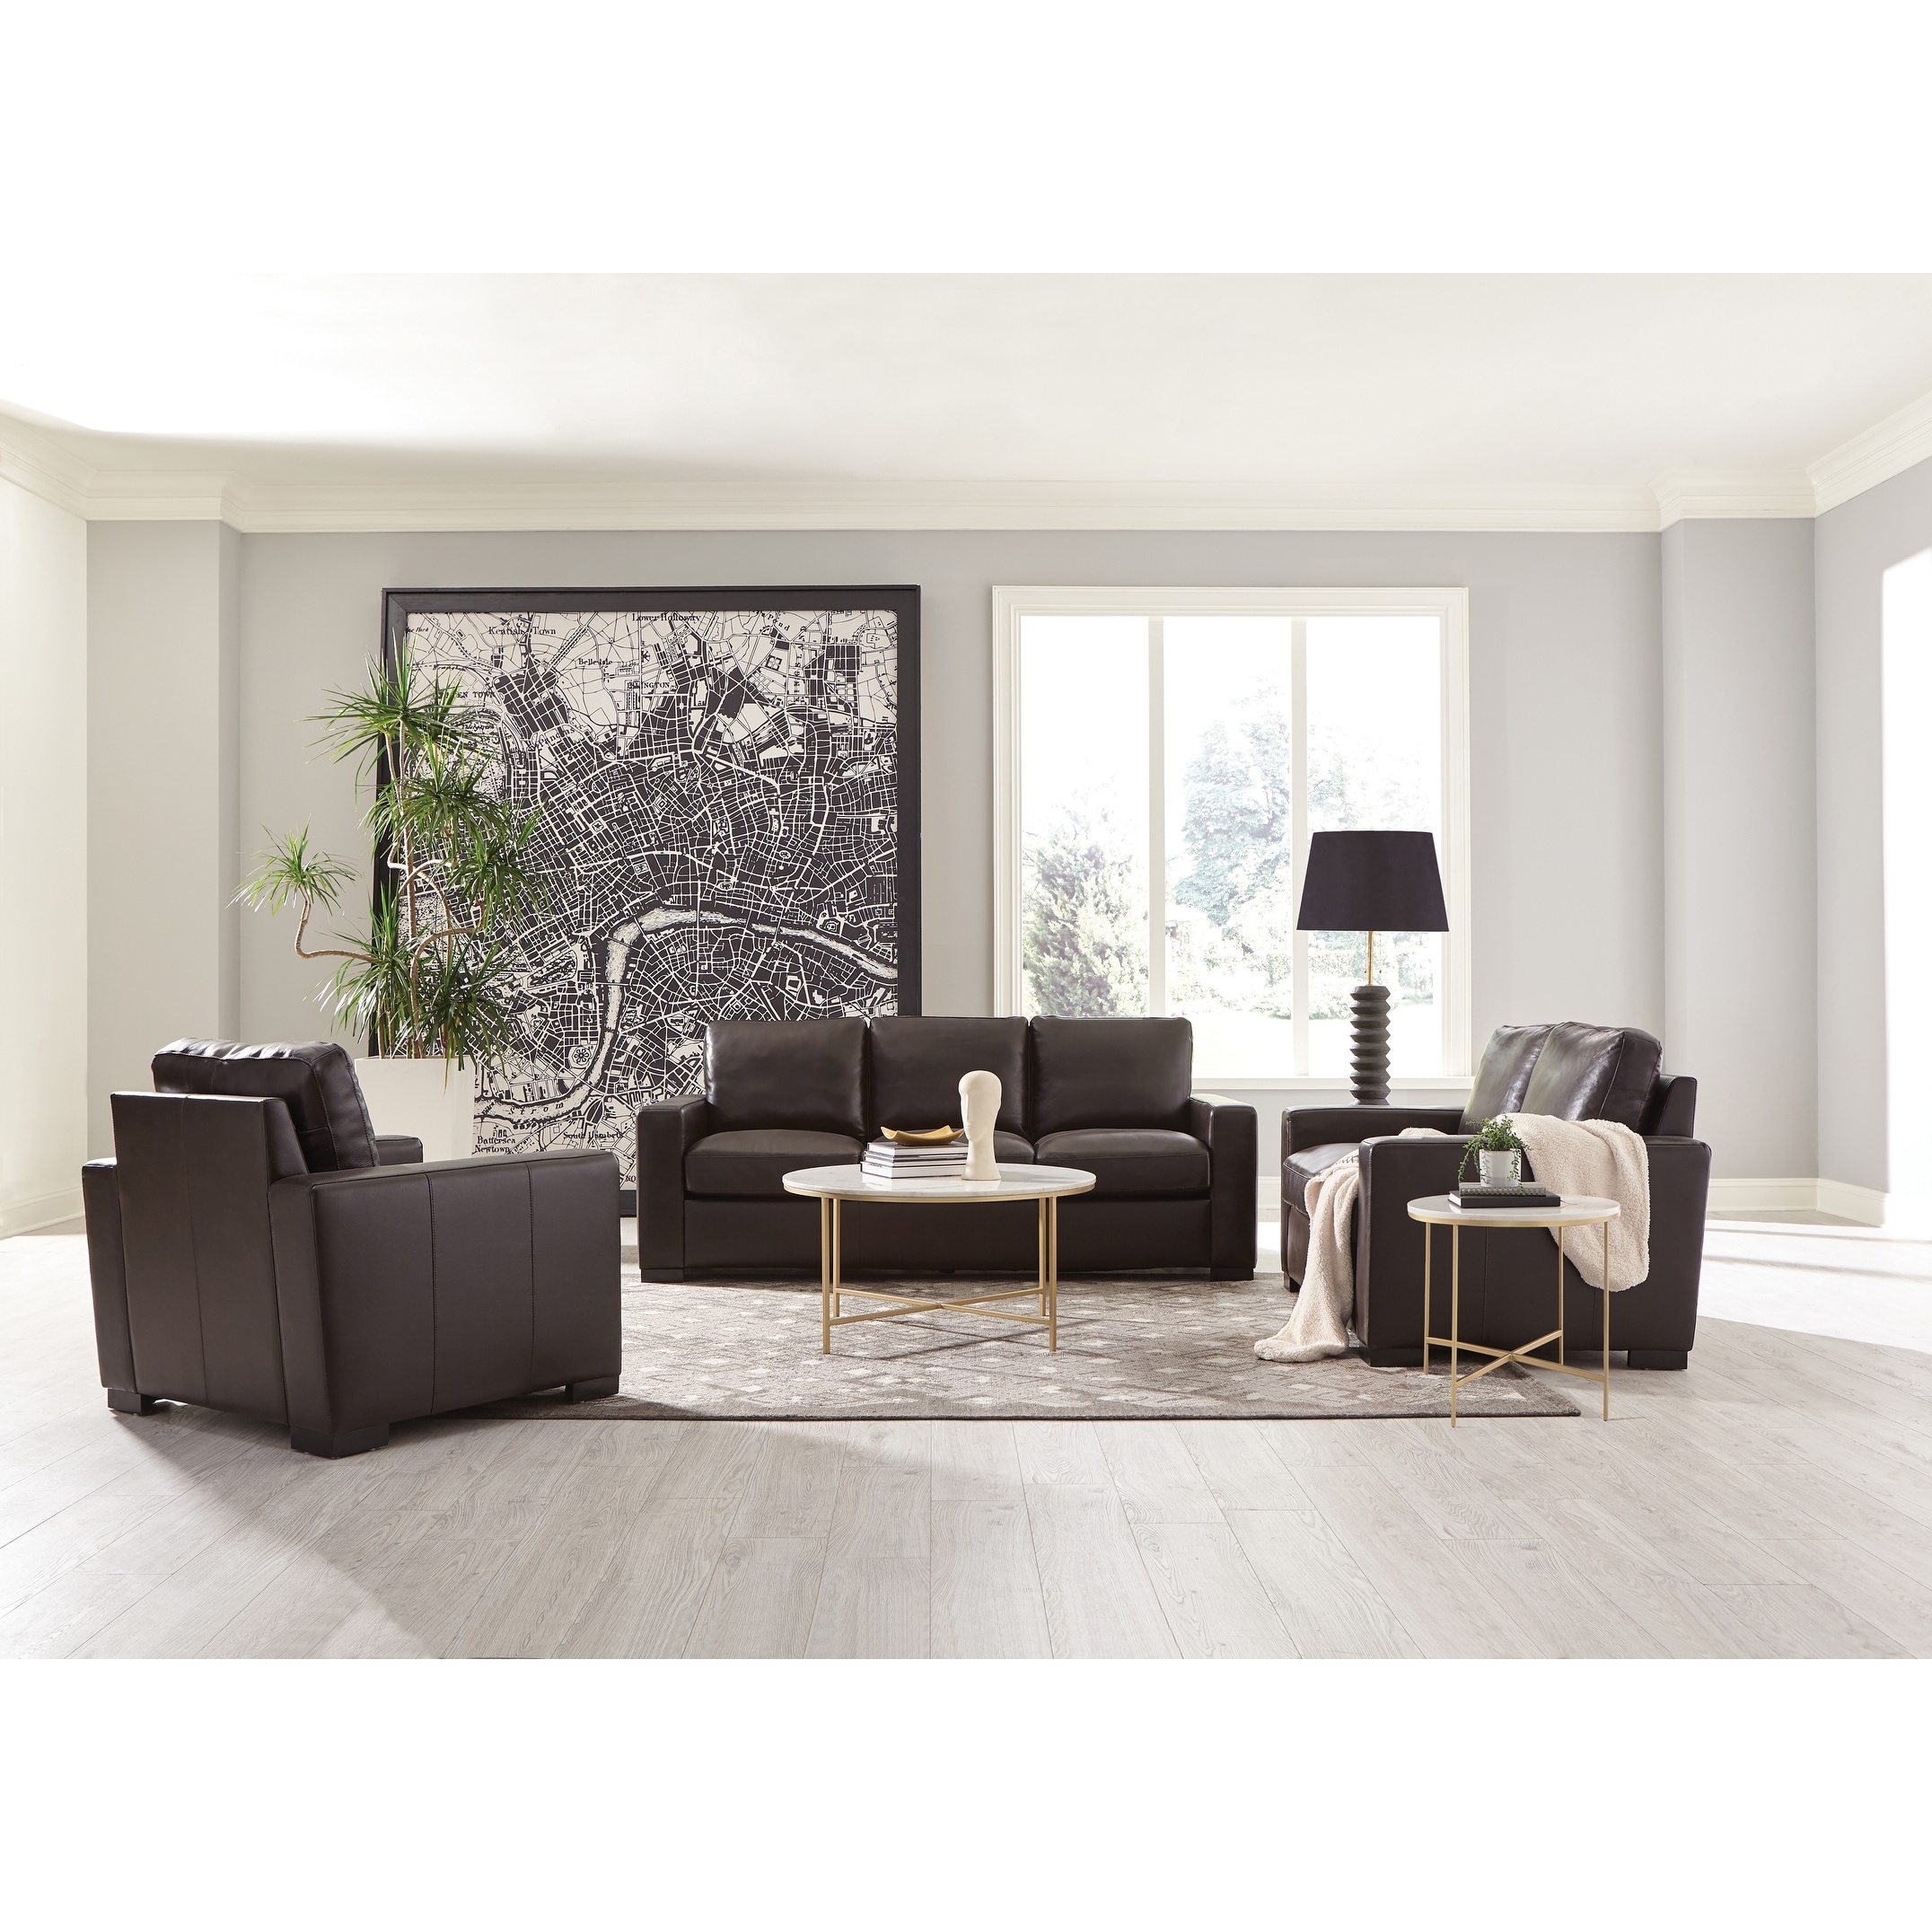 Boardmead Dark Brown Track Arms 3 Piece Living Room Set On Sale Overstock 32248470